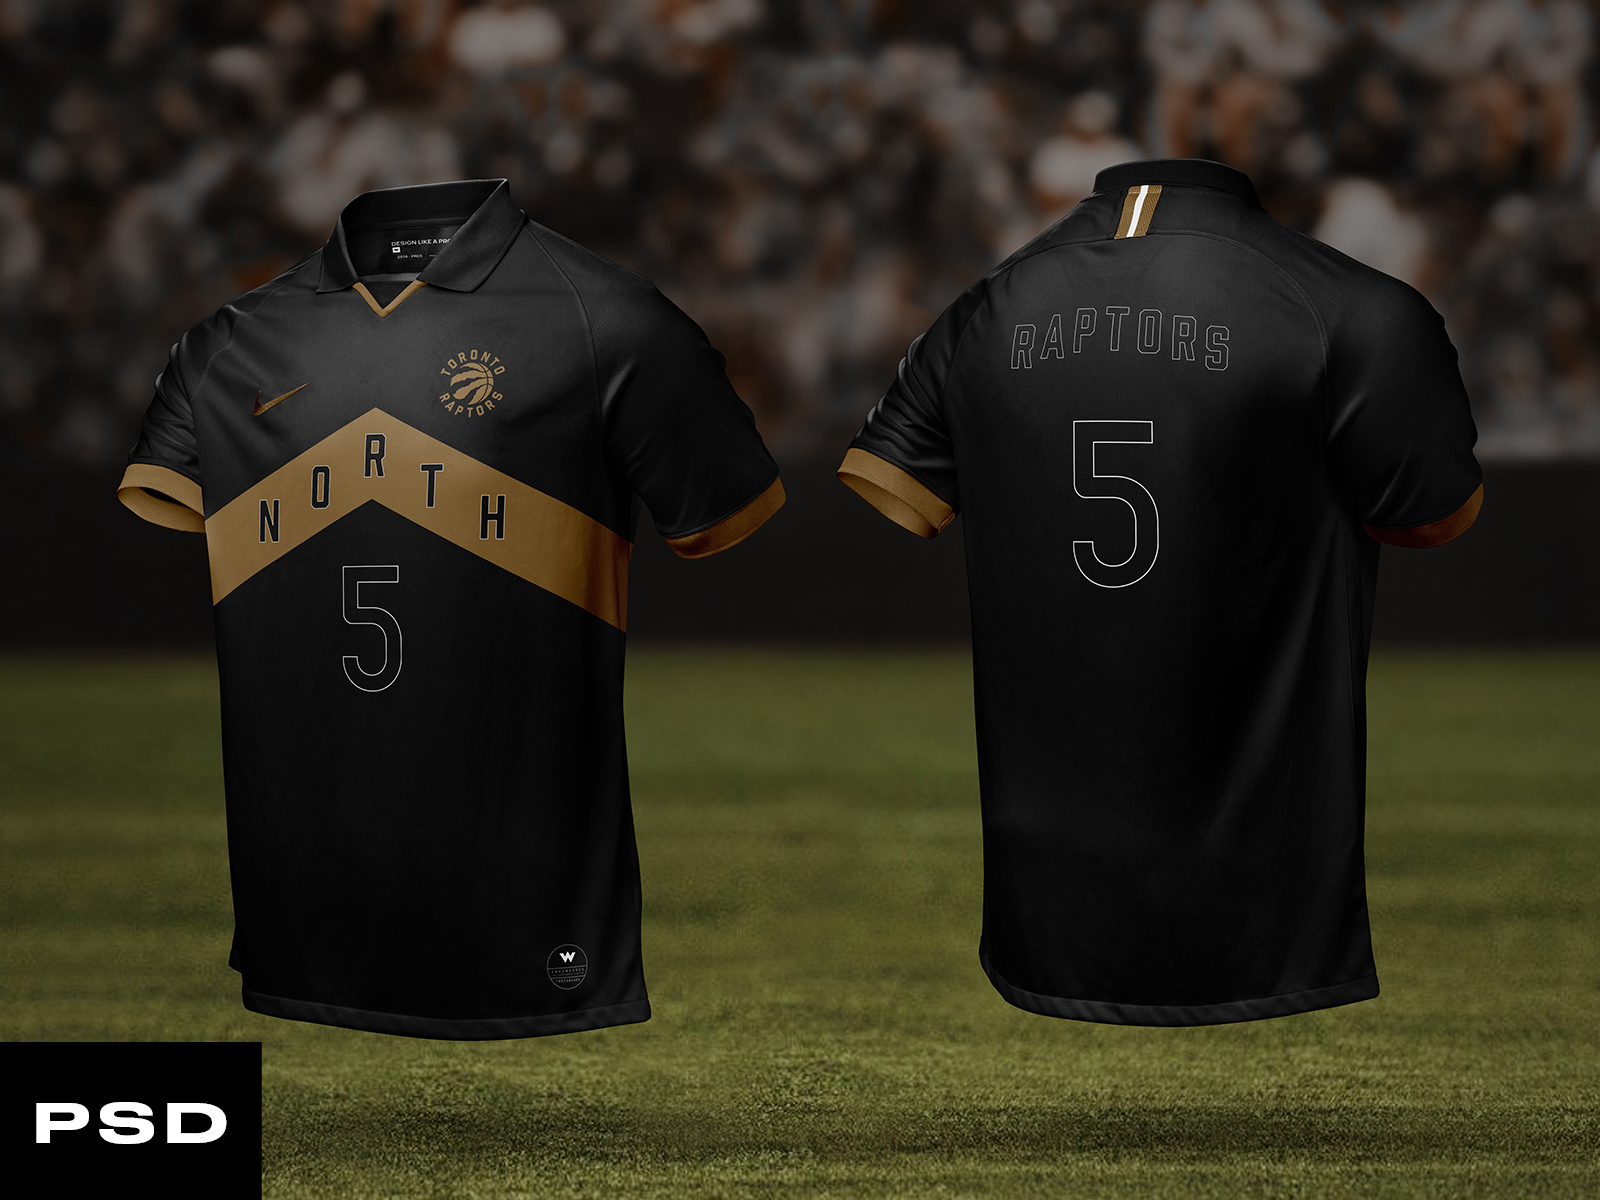 Download Mens Ghost Soccer Jersey Mockup Template by Brandon ... Free Mockups